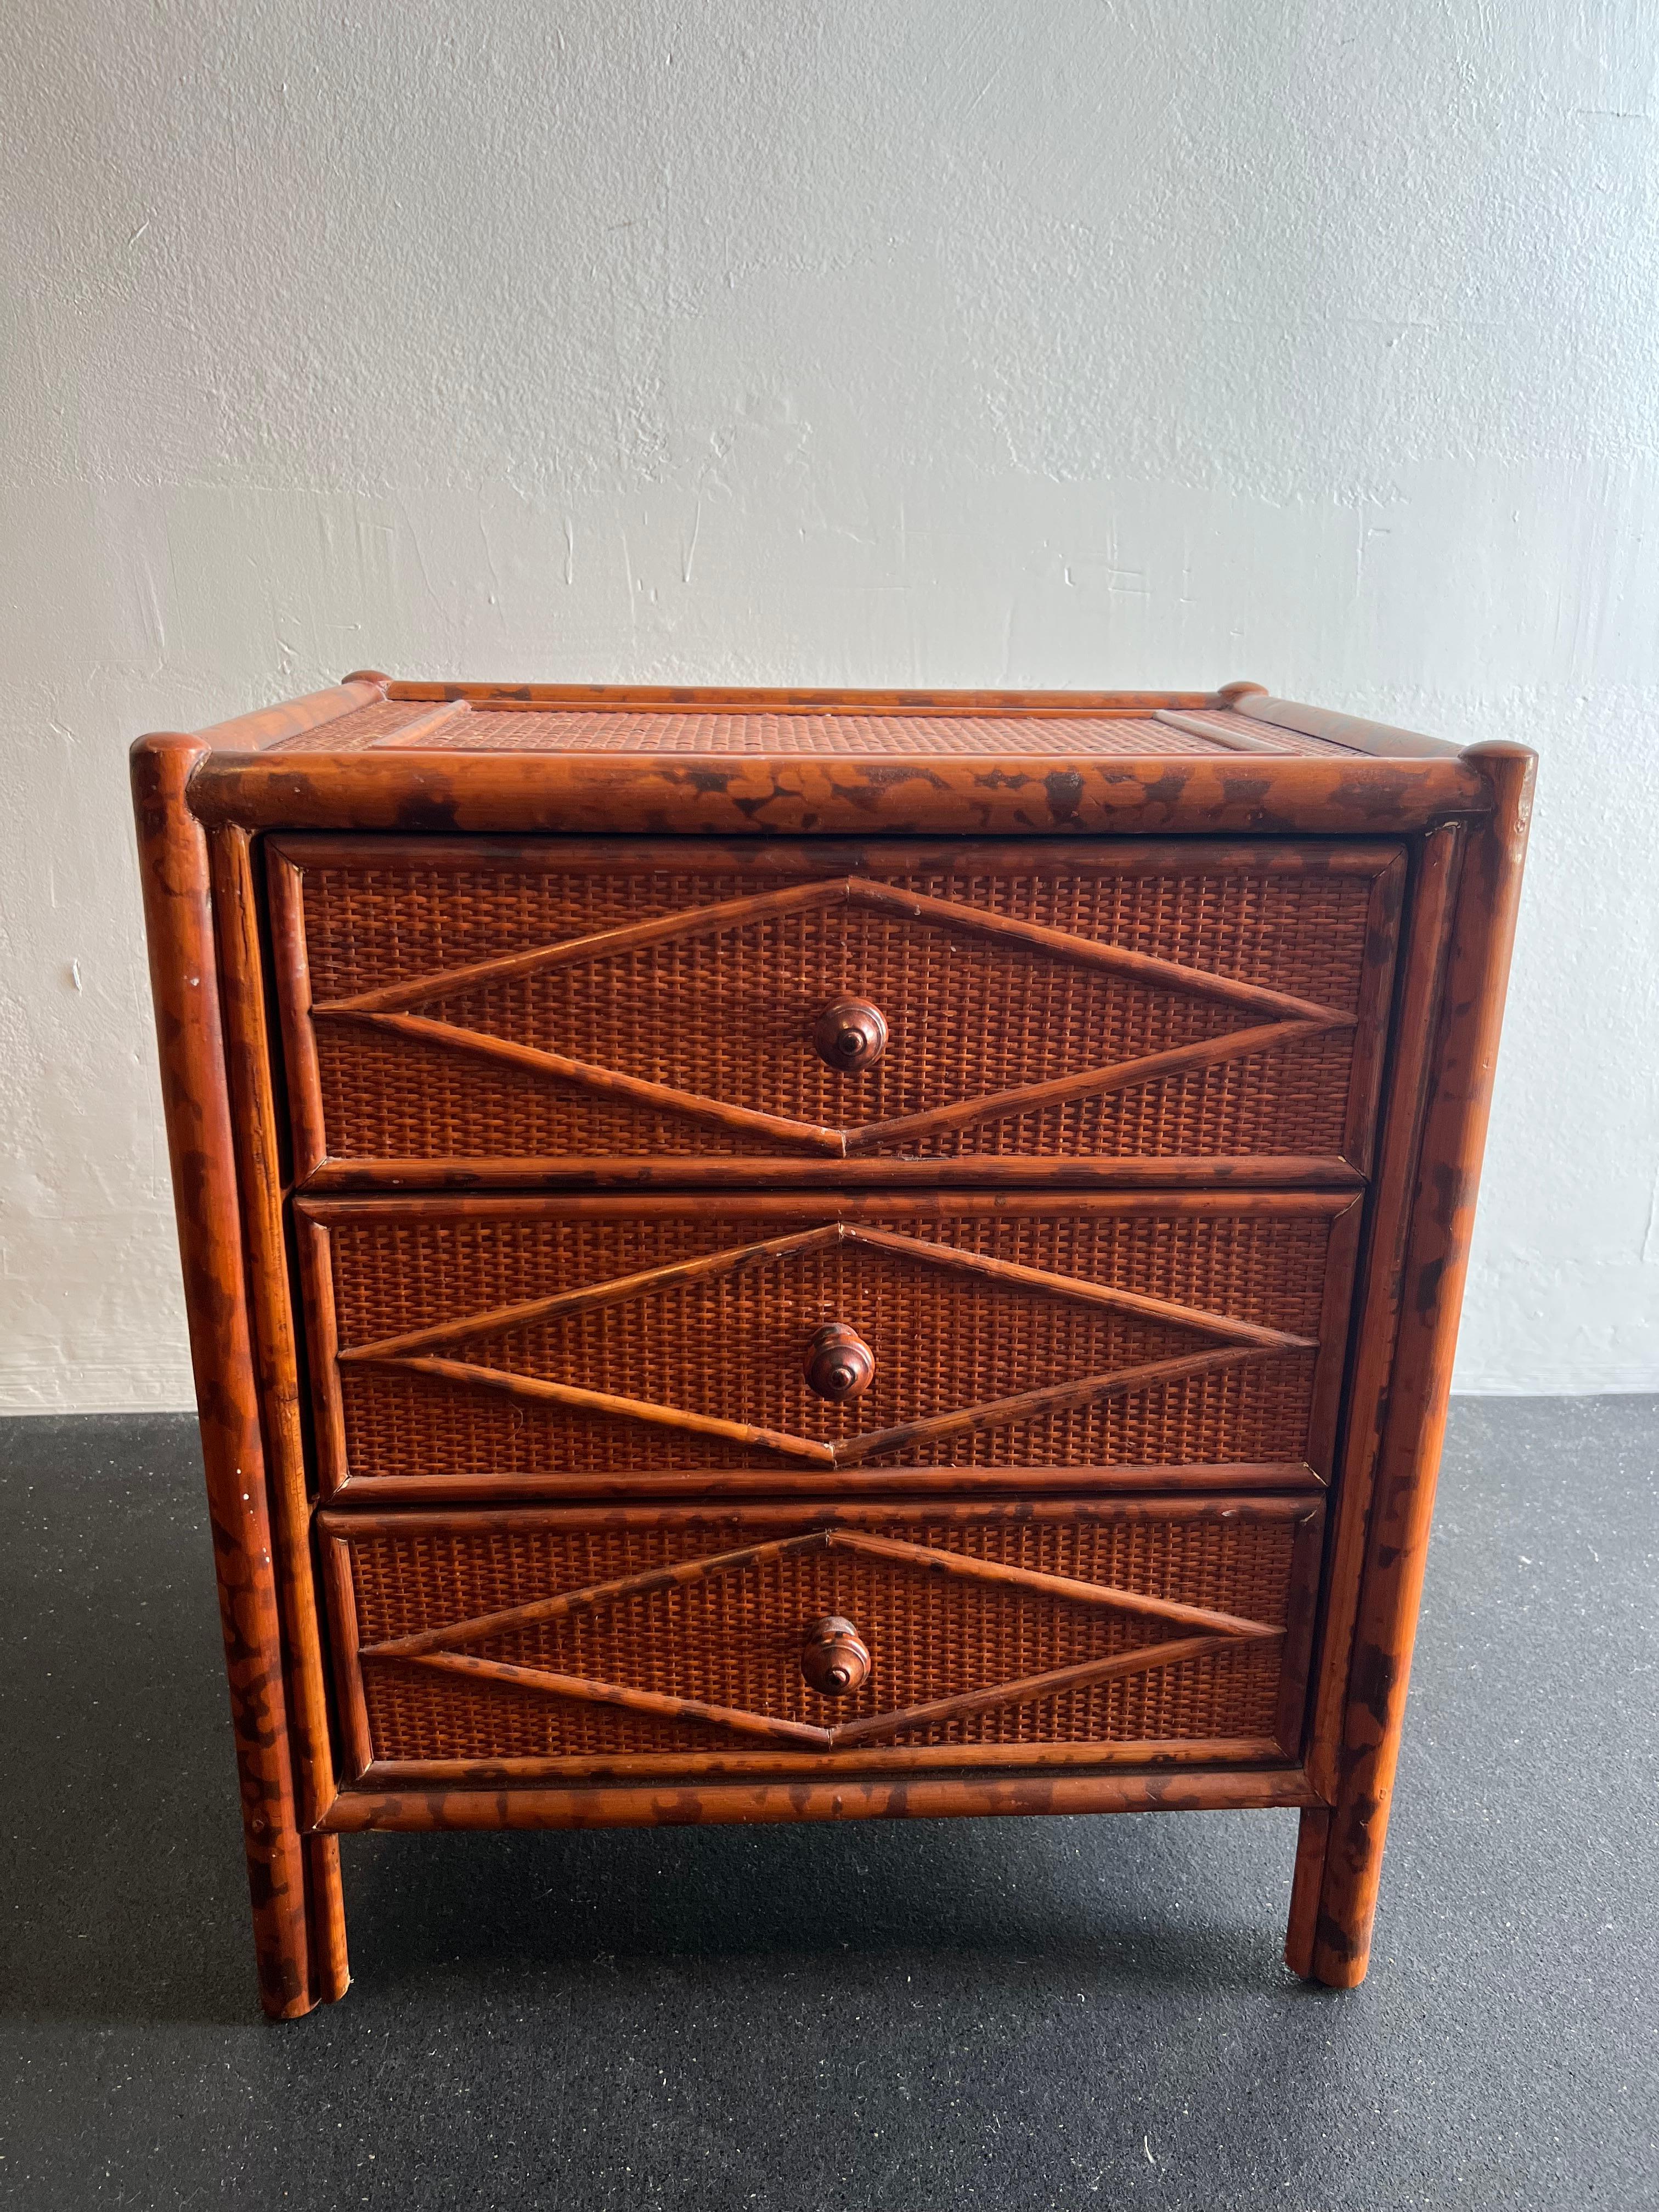 British colonial style burnt bamboo and cane nightstand. Signed Bloomingdales. Wear to finish of cane (please refer to photos). Additional photos available upon request.

Would work well in a variety of interiors such as modern, mid century modern,